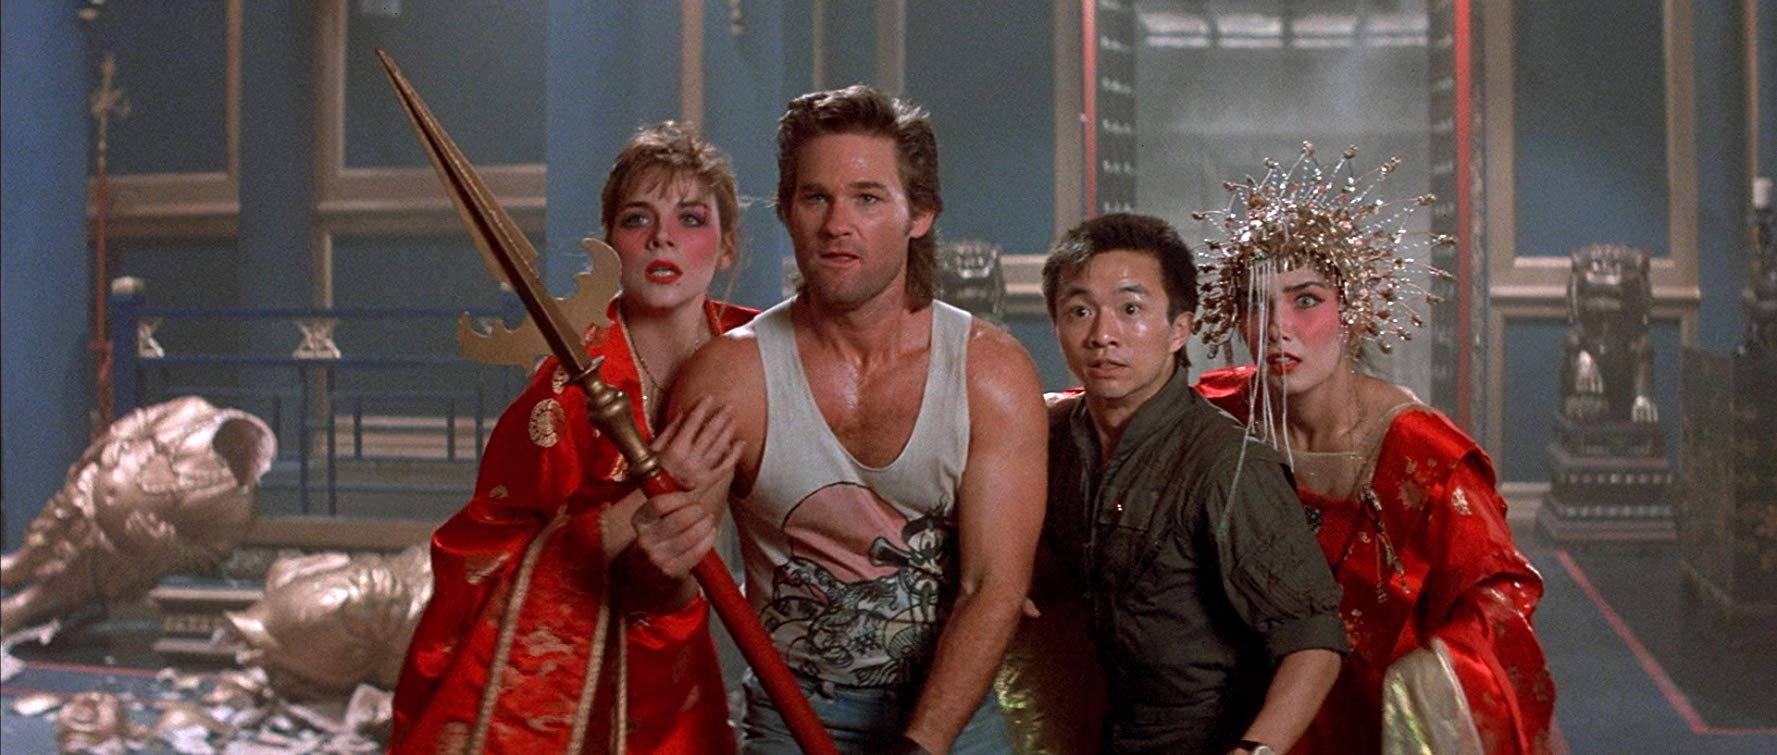 big-trouble-in-little-china-cast